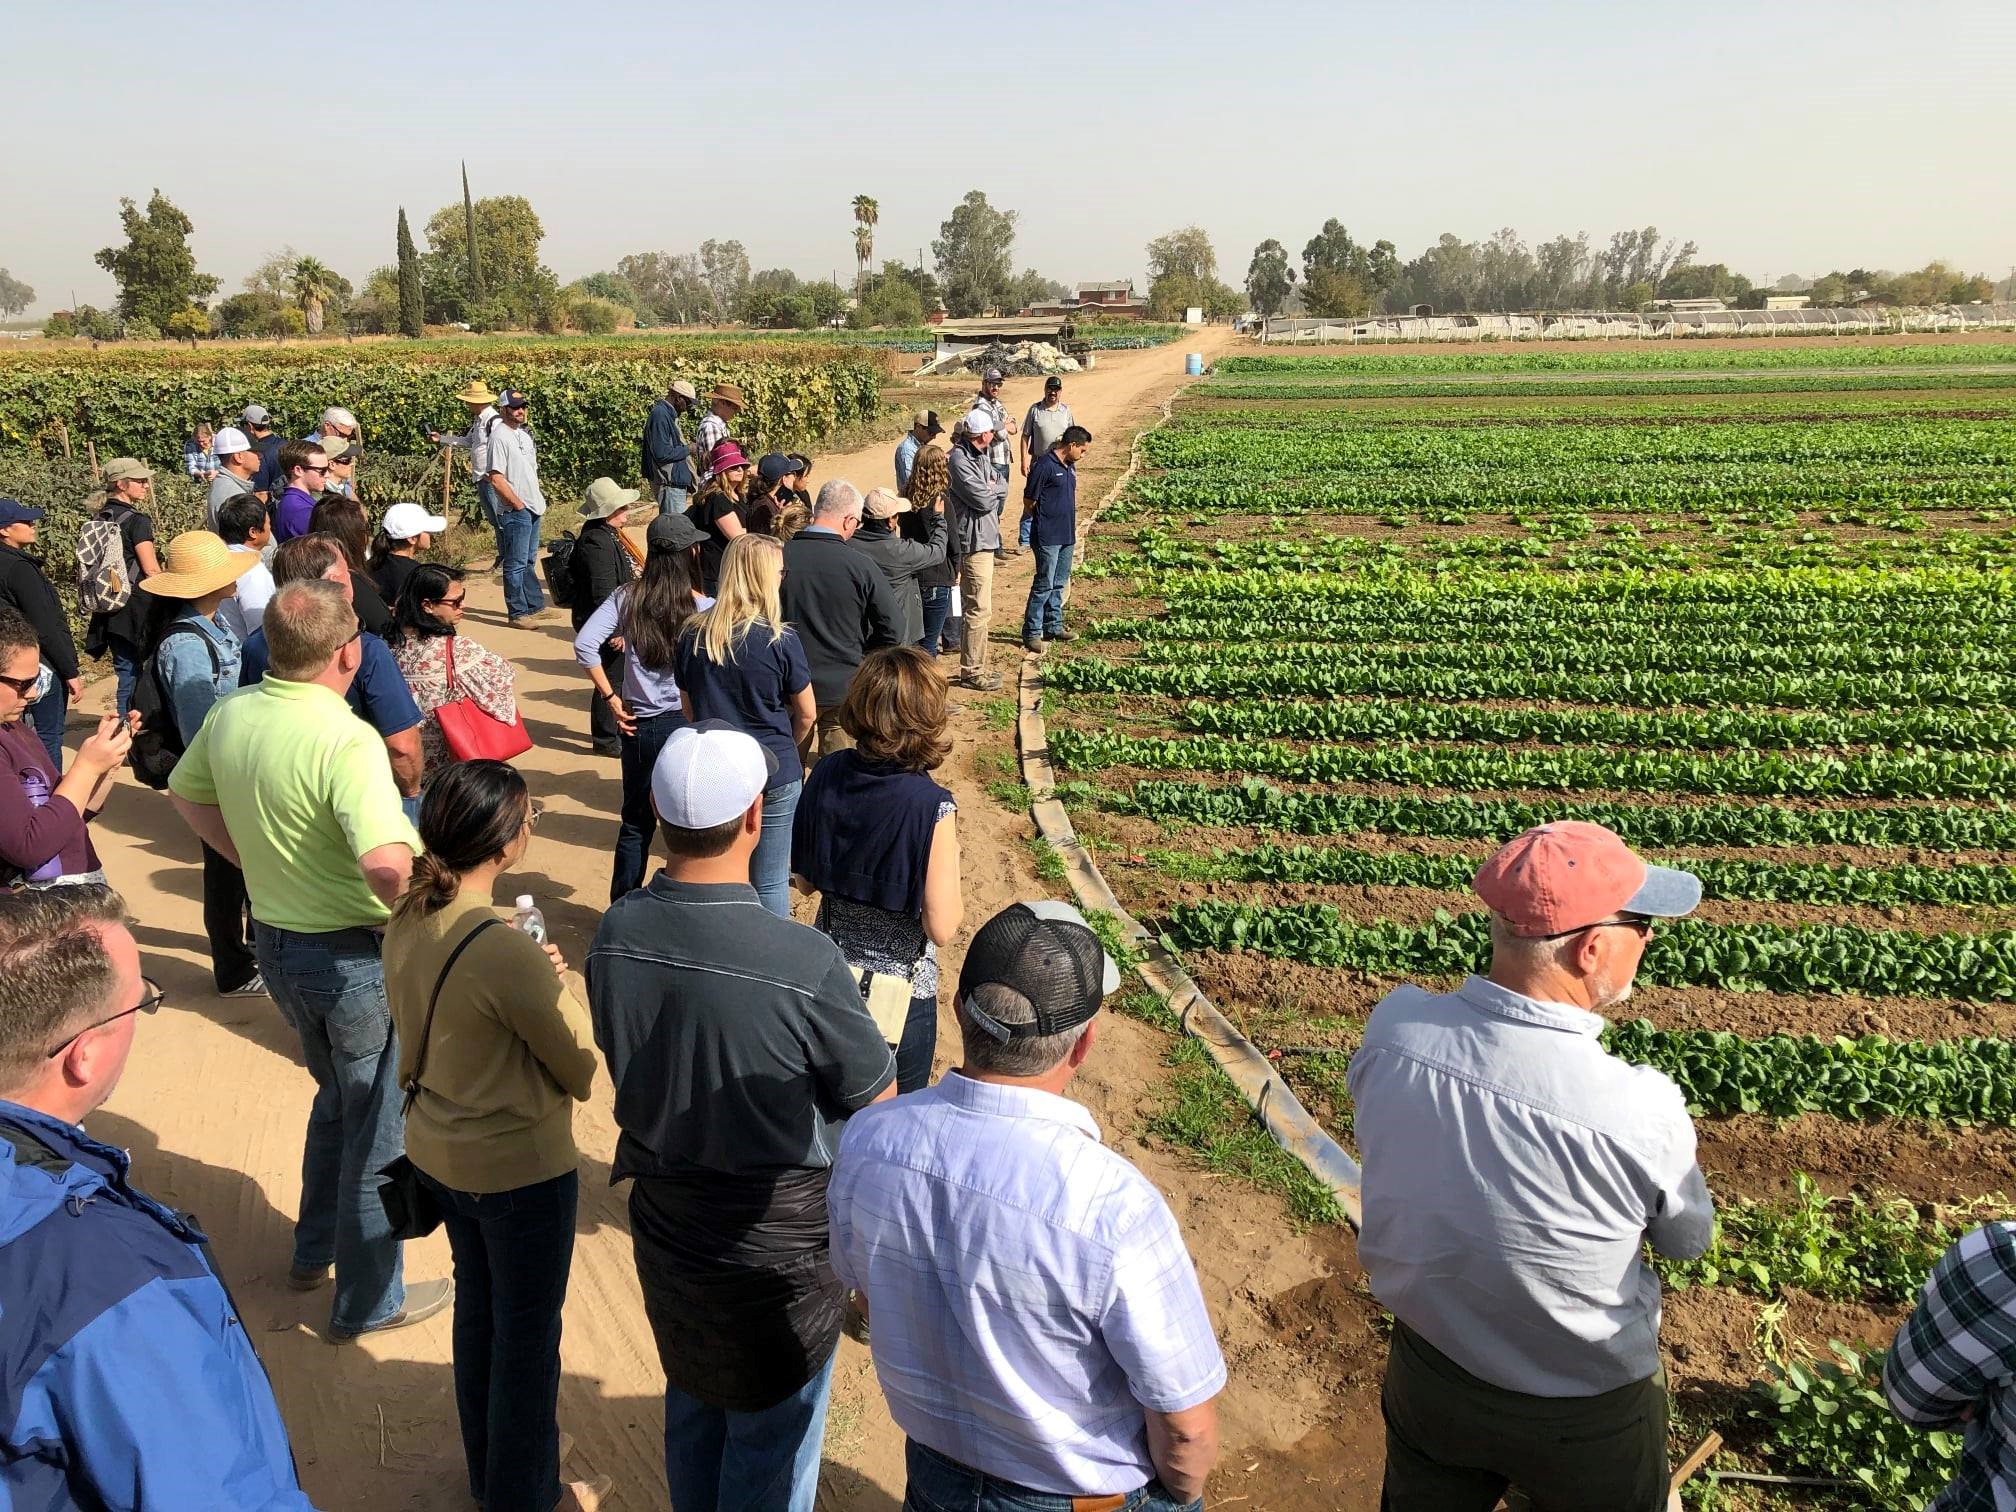 Farm tour attendees looking at field of various leafy green vegetables.